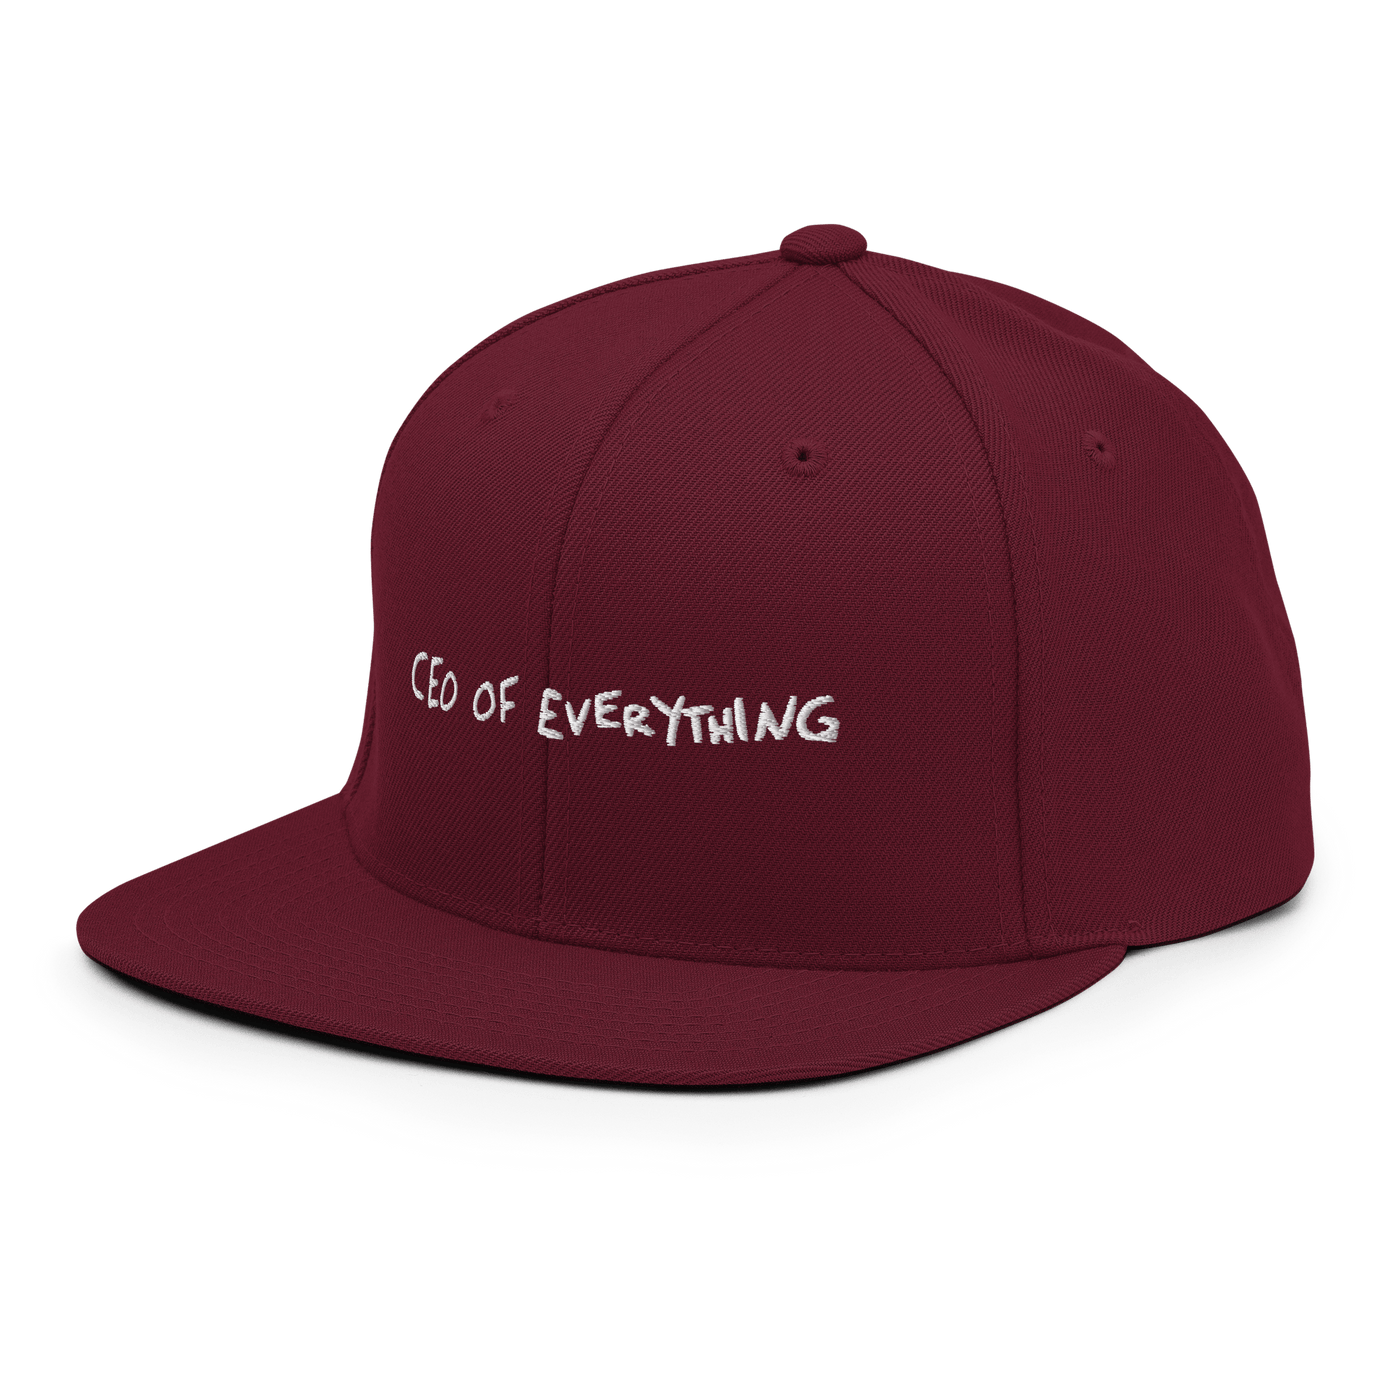 CEO of everything Snapback - Maroon - - Just Another Cap Store